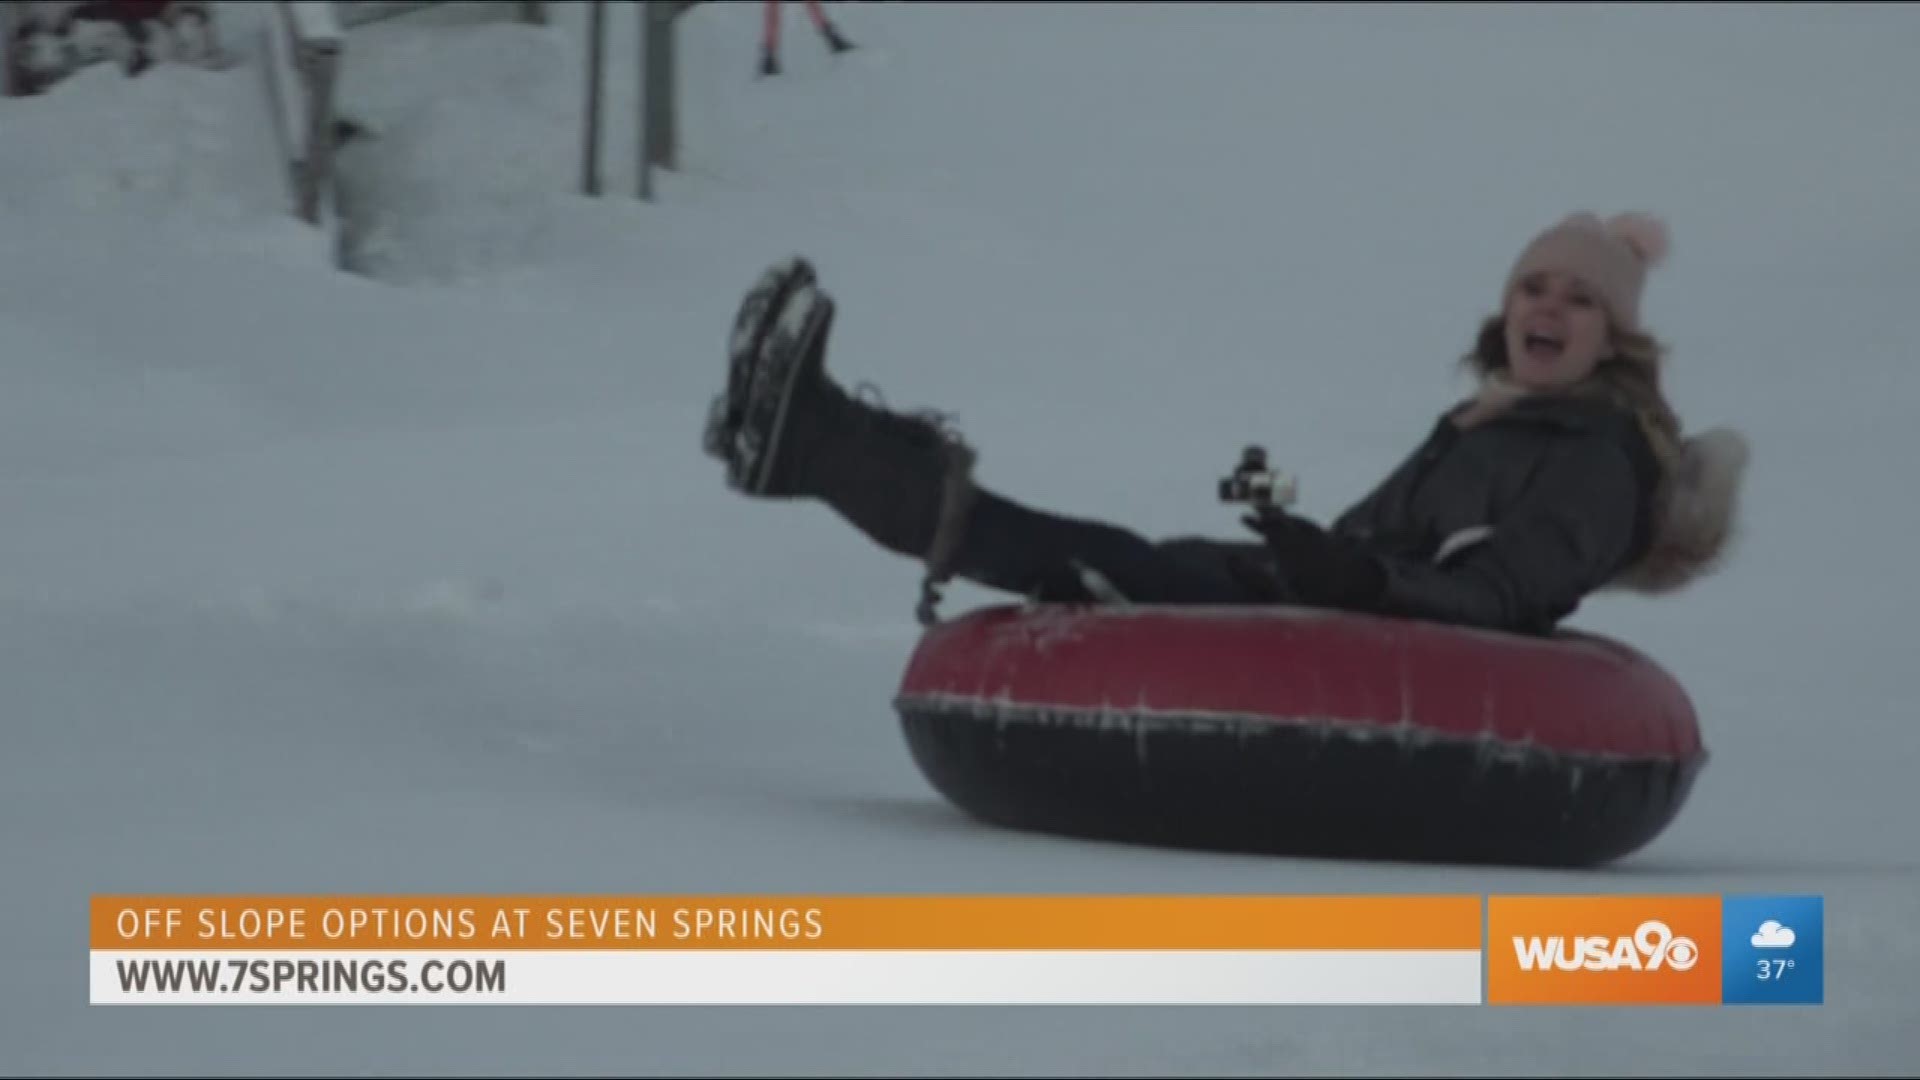 This segment is sponsored by 7 Springs. You can find fun on and off the slopes at 7 Springs. They have everything from a spa, snowtubing and even an arcade.